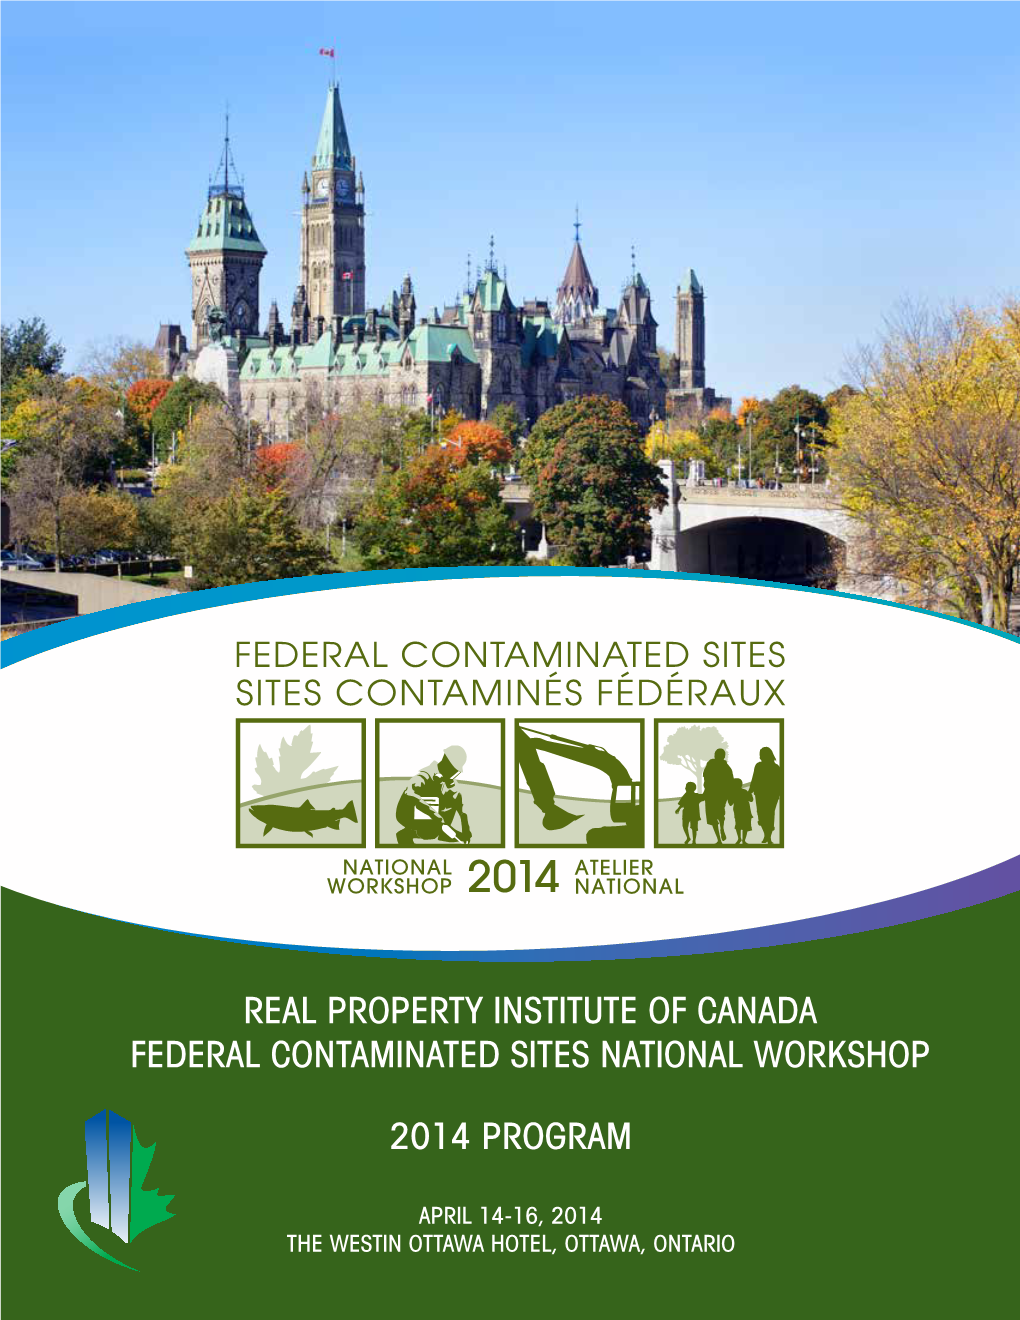 Real Property Institute of Canada Federal Contaminated Sites National Workshop